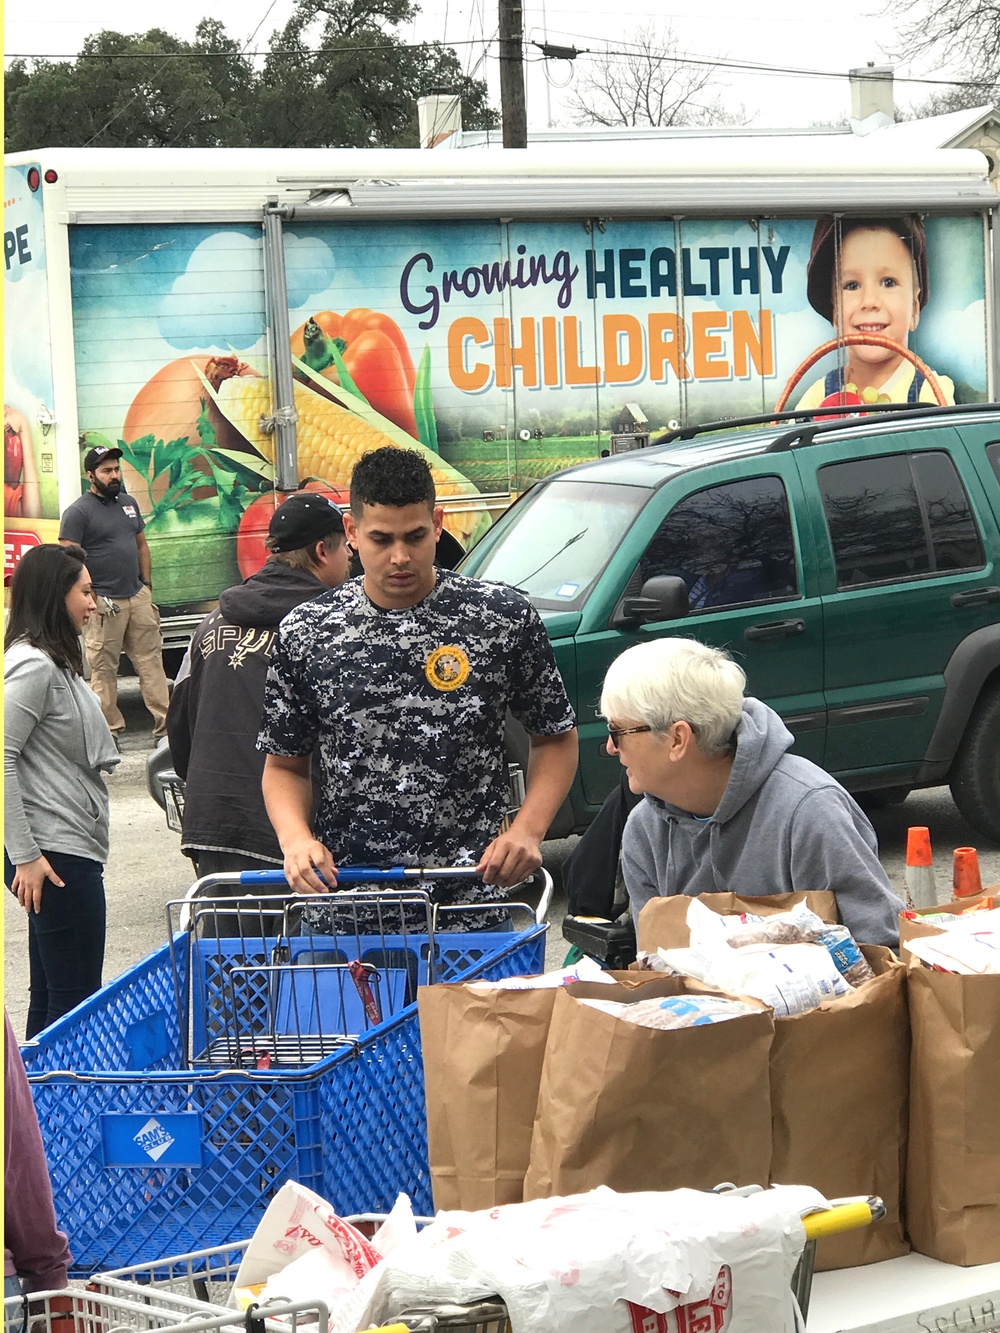 NRD San Antonio Recruiters assist Salvation Army with Food Distribution